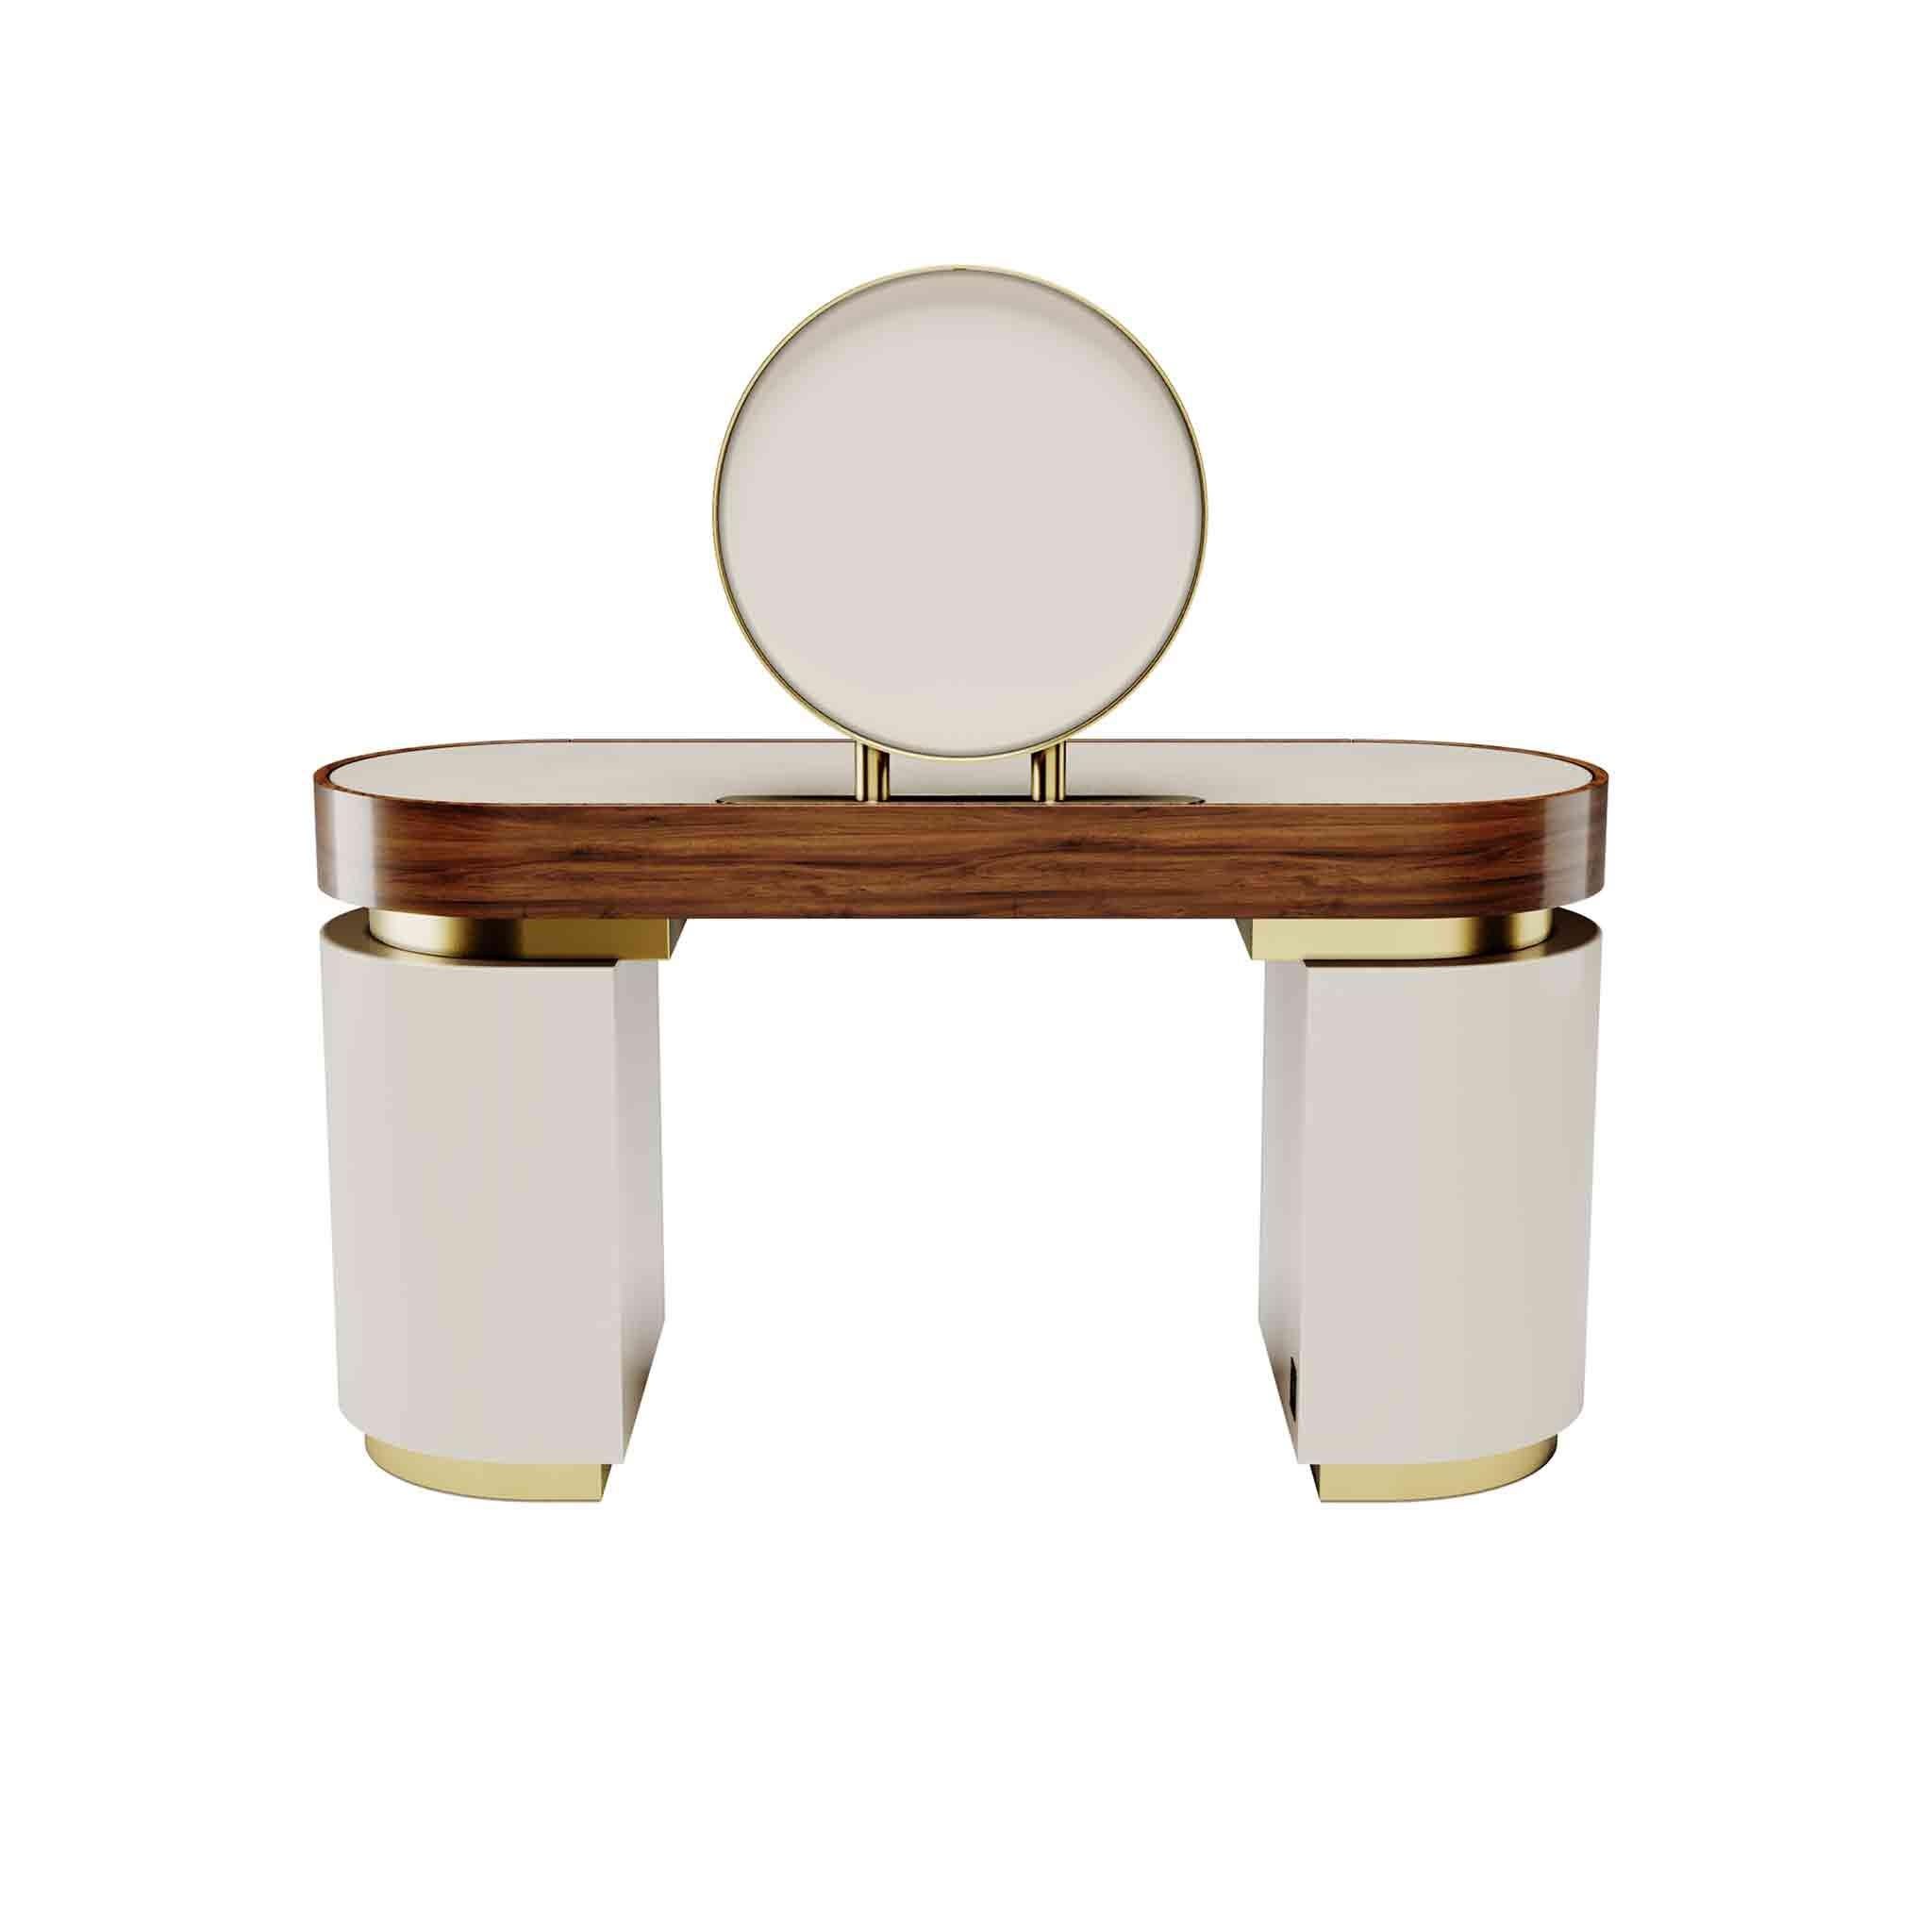 Portuguese Art Deco Modern Vanity Dressing Table Round Mirror Leather & Walnut Wood  For Sale